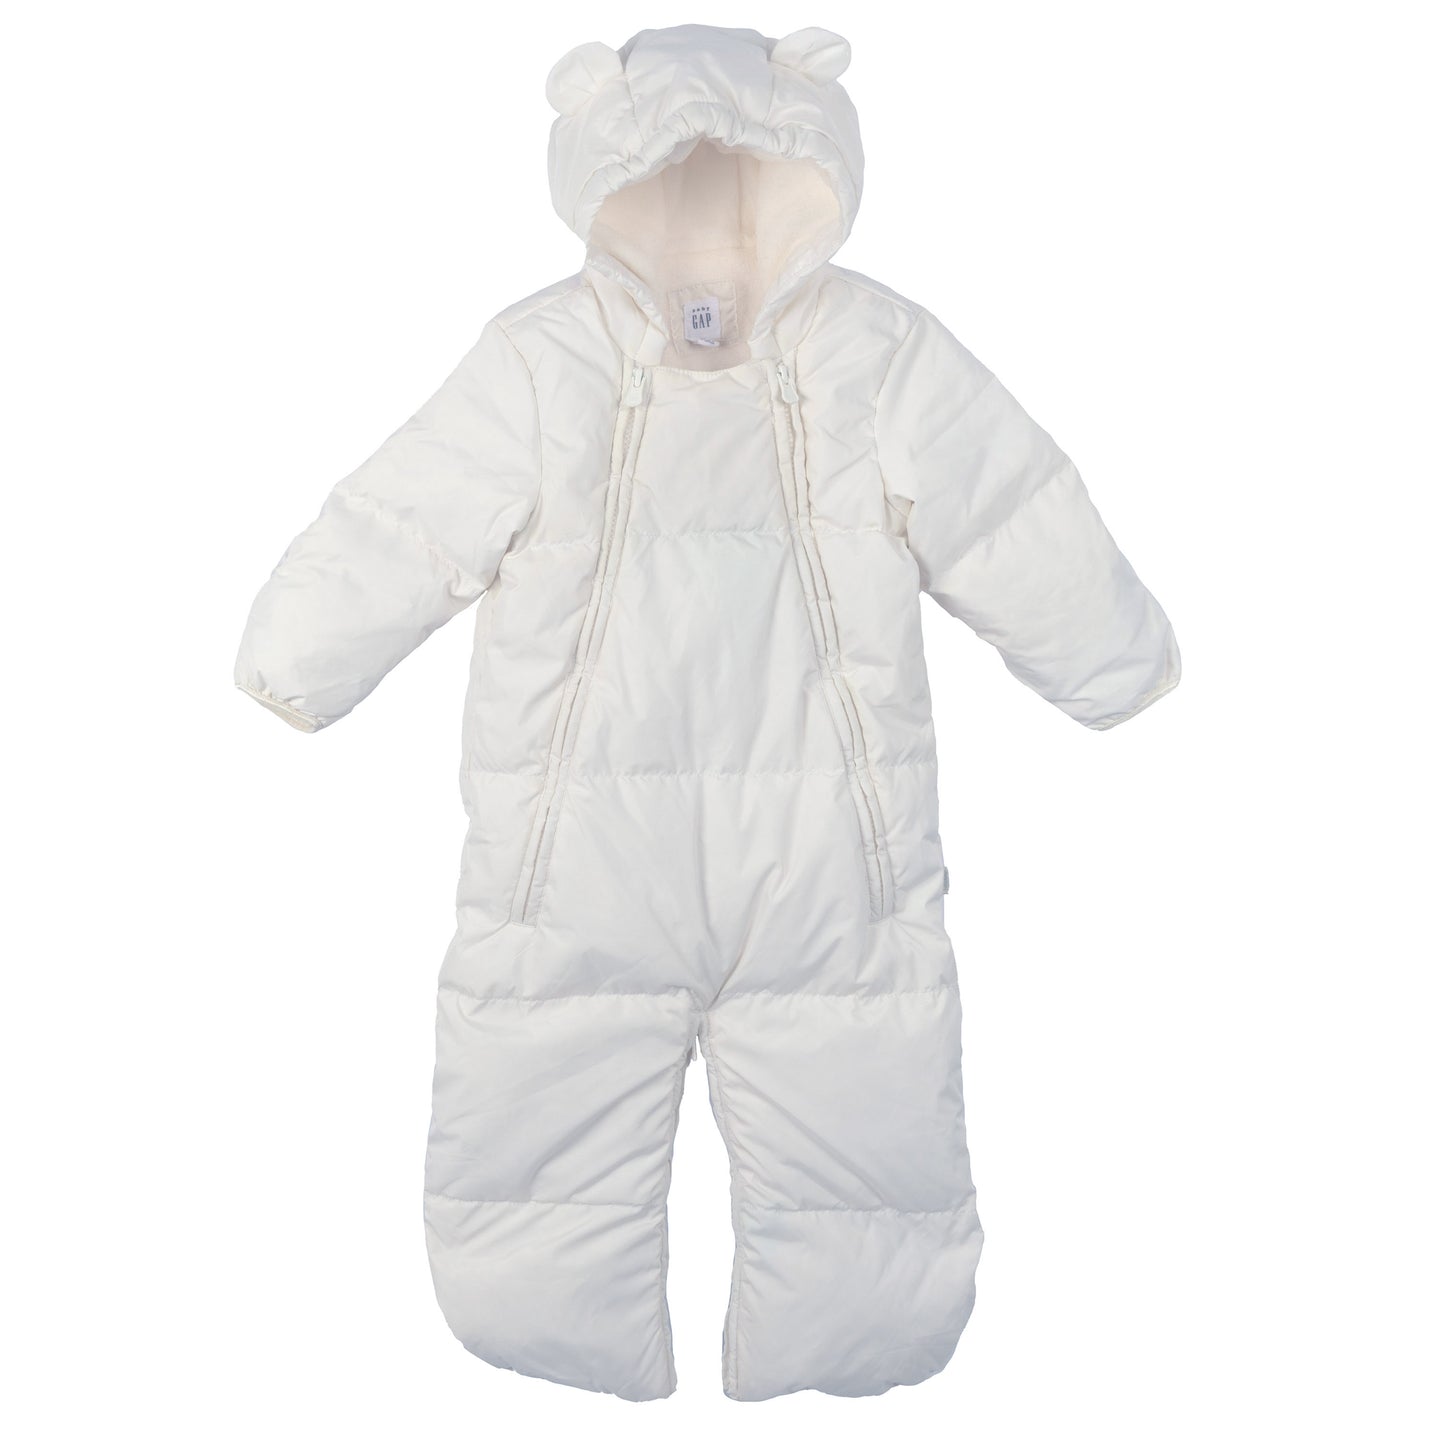 [12-18m] Baby Gap Warmest Snowsuit Convertible Bunting in White